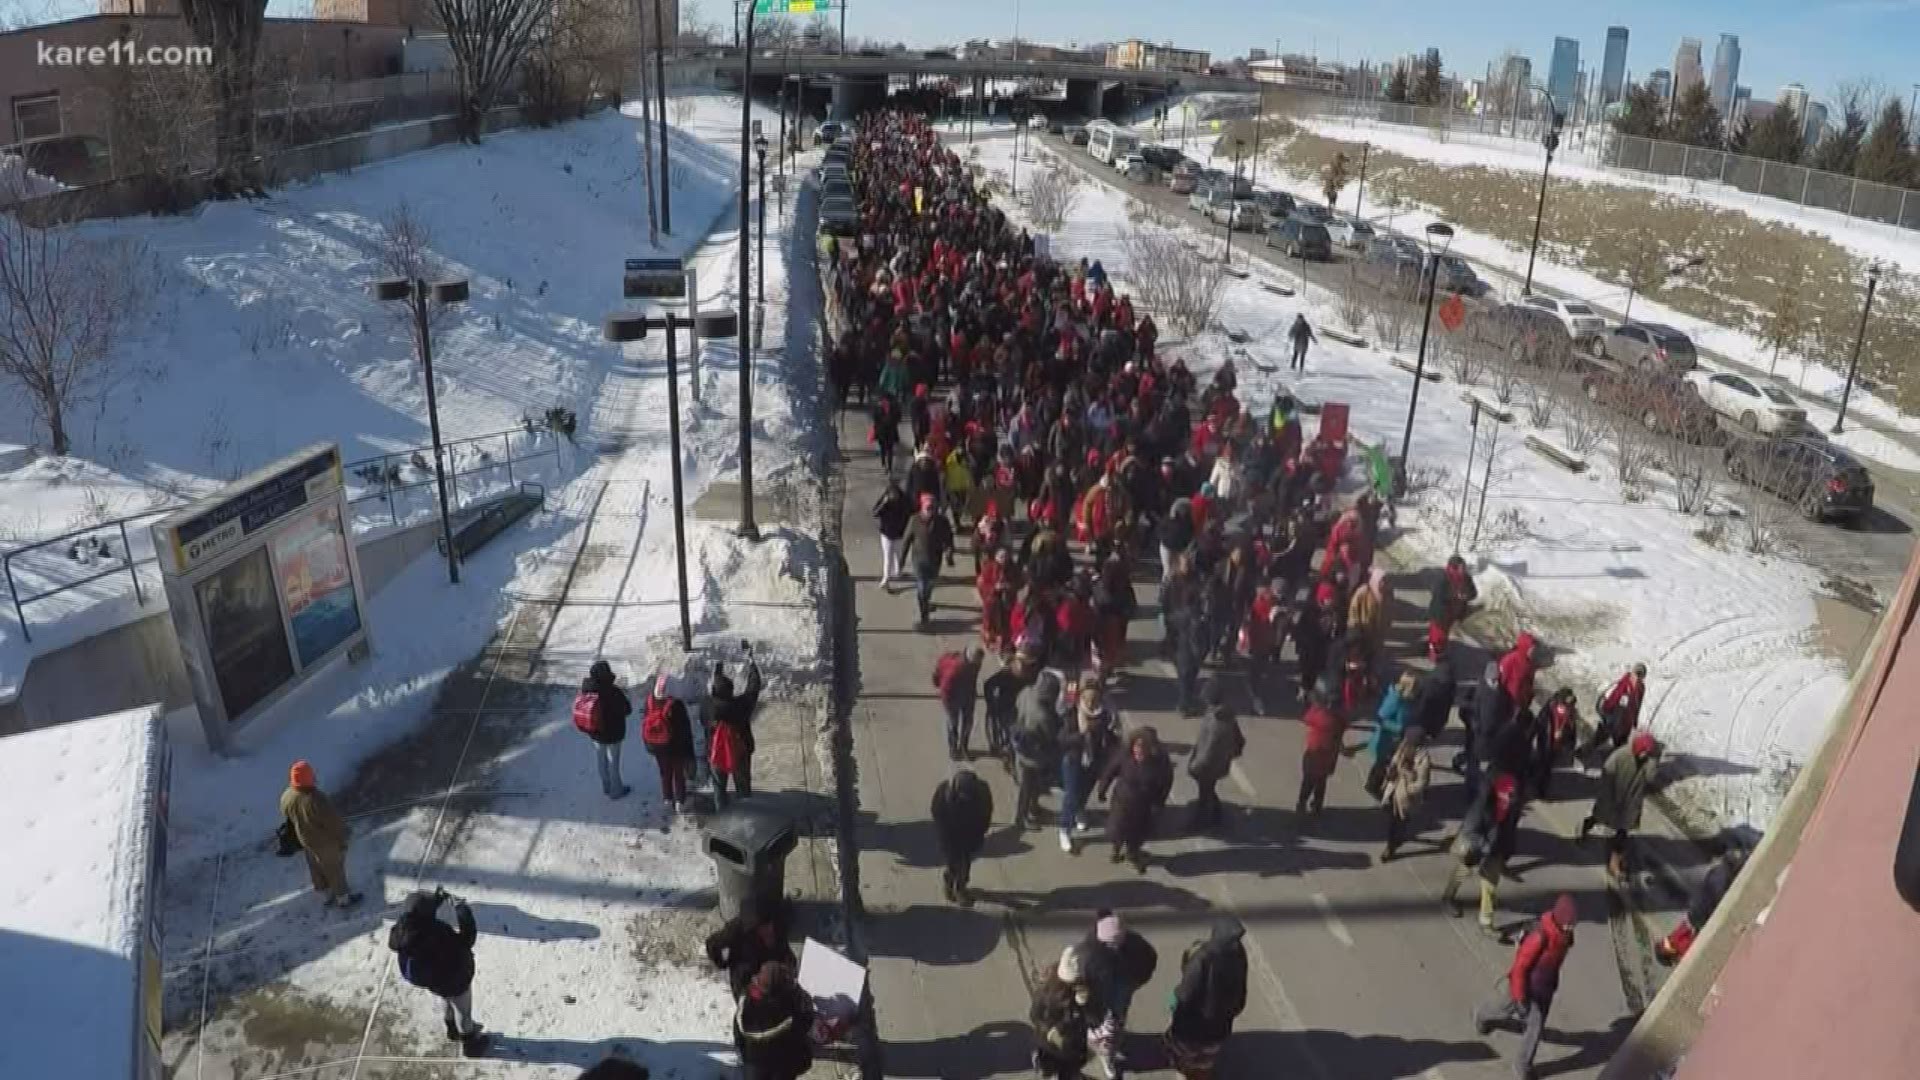 Thousands of people held the annual "Not One More" rally on Friday. The rally and walk went along Bloomington Avenue in Minneapolis.